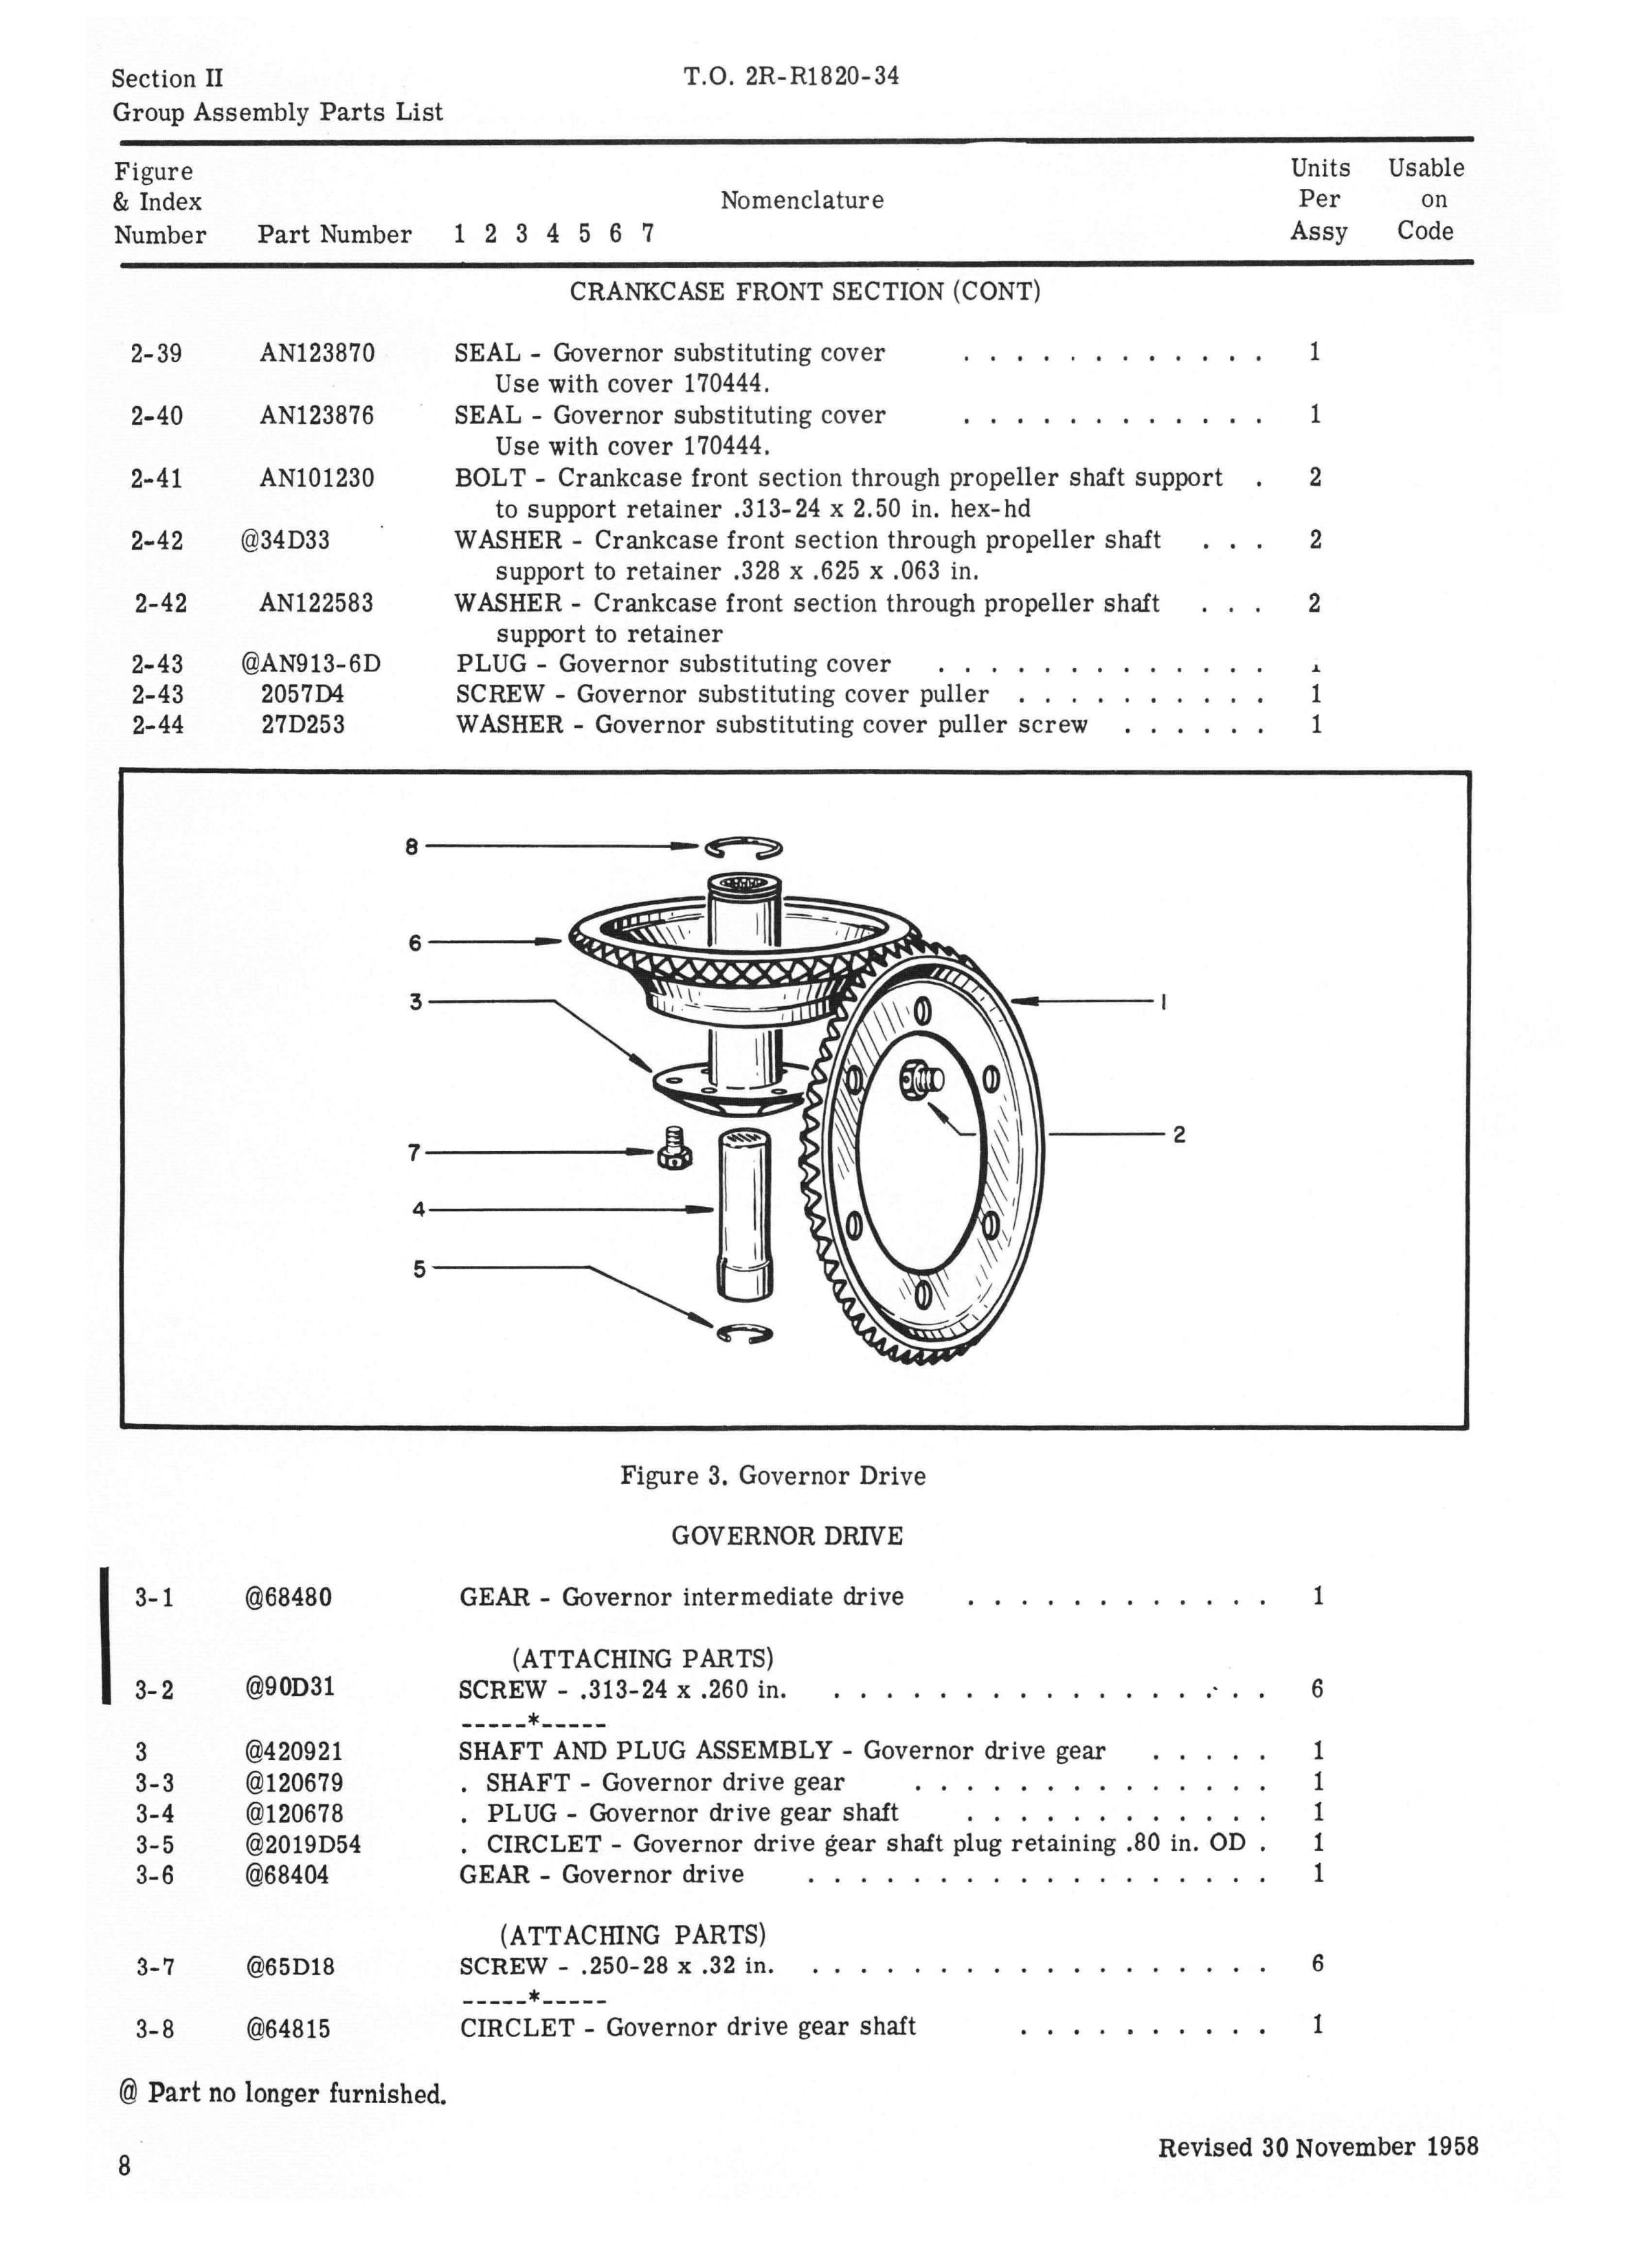 Sample page 12 from AirCorps Library document: Illustrated Parts Breakdown for Model R-1820-103 Engine